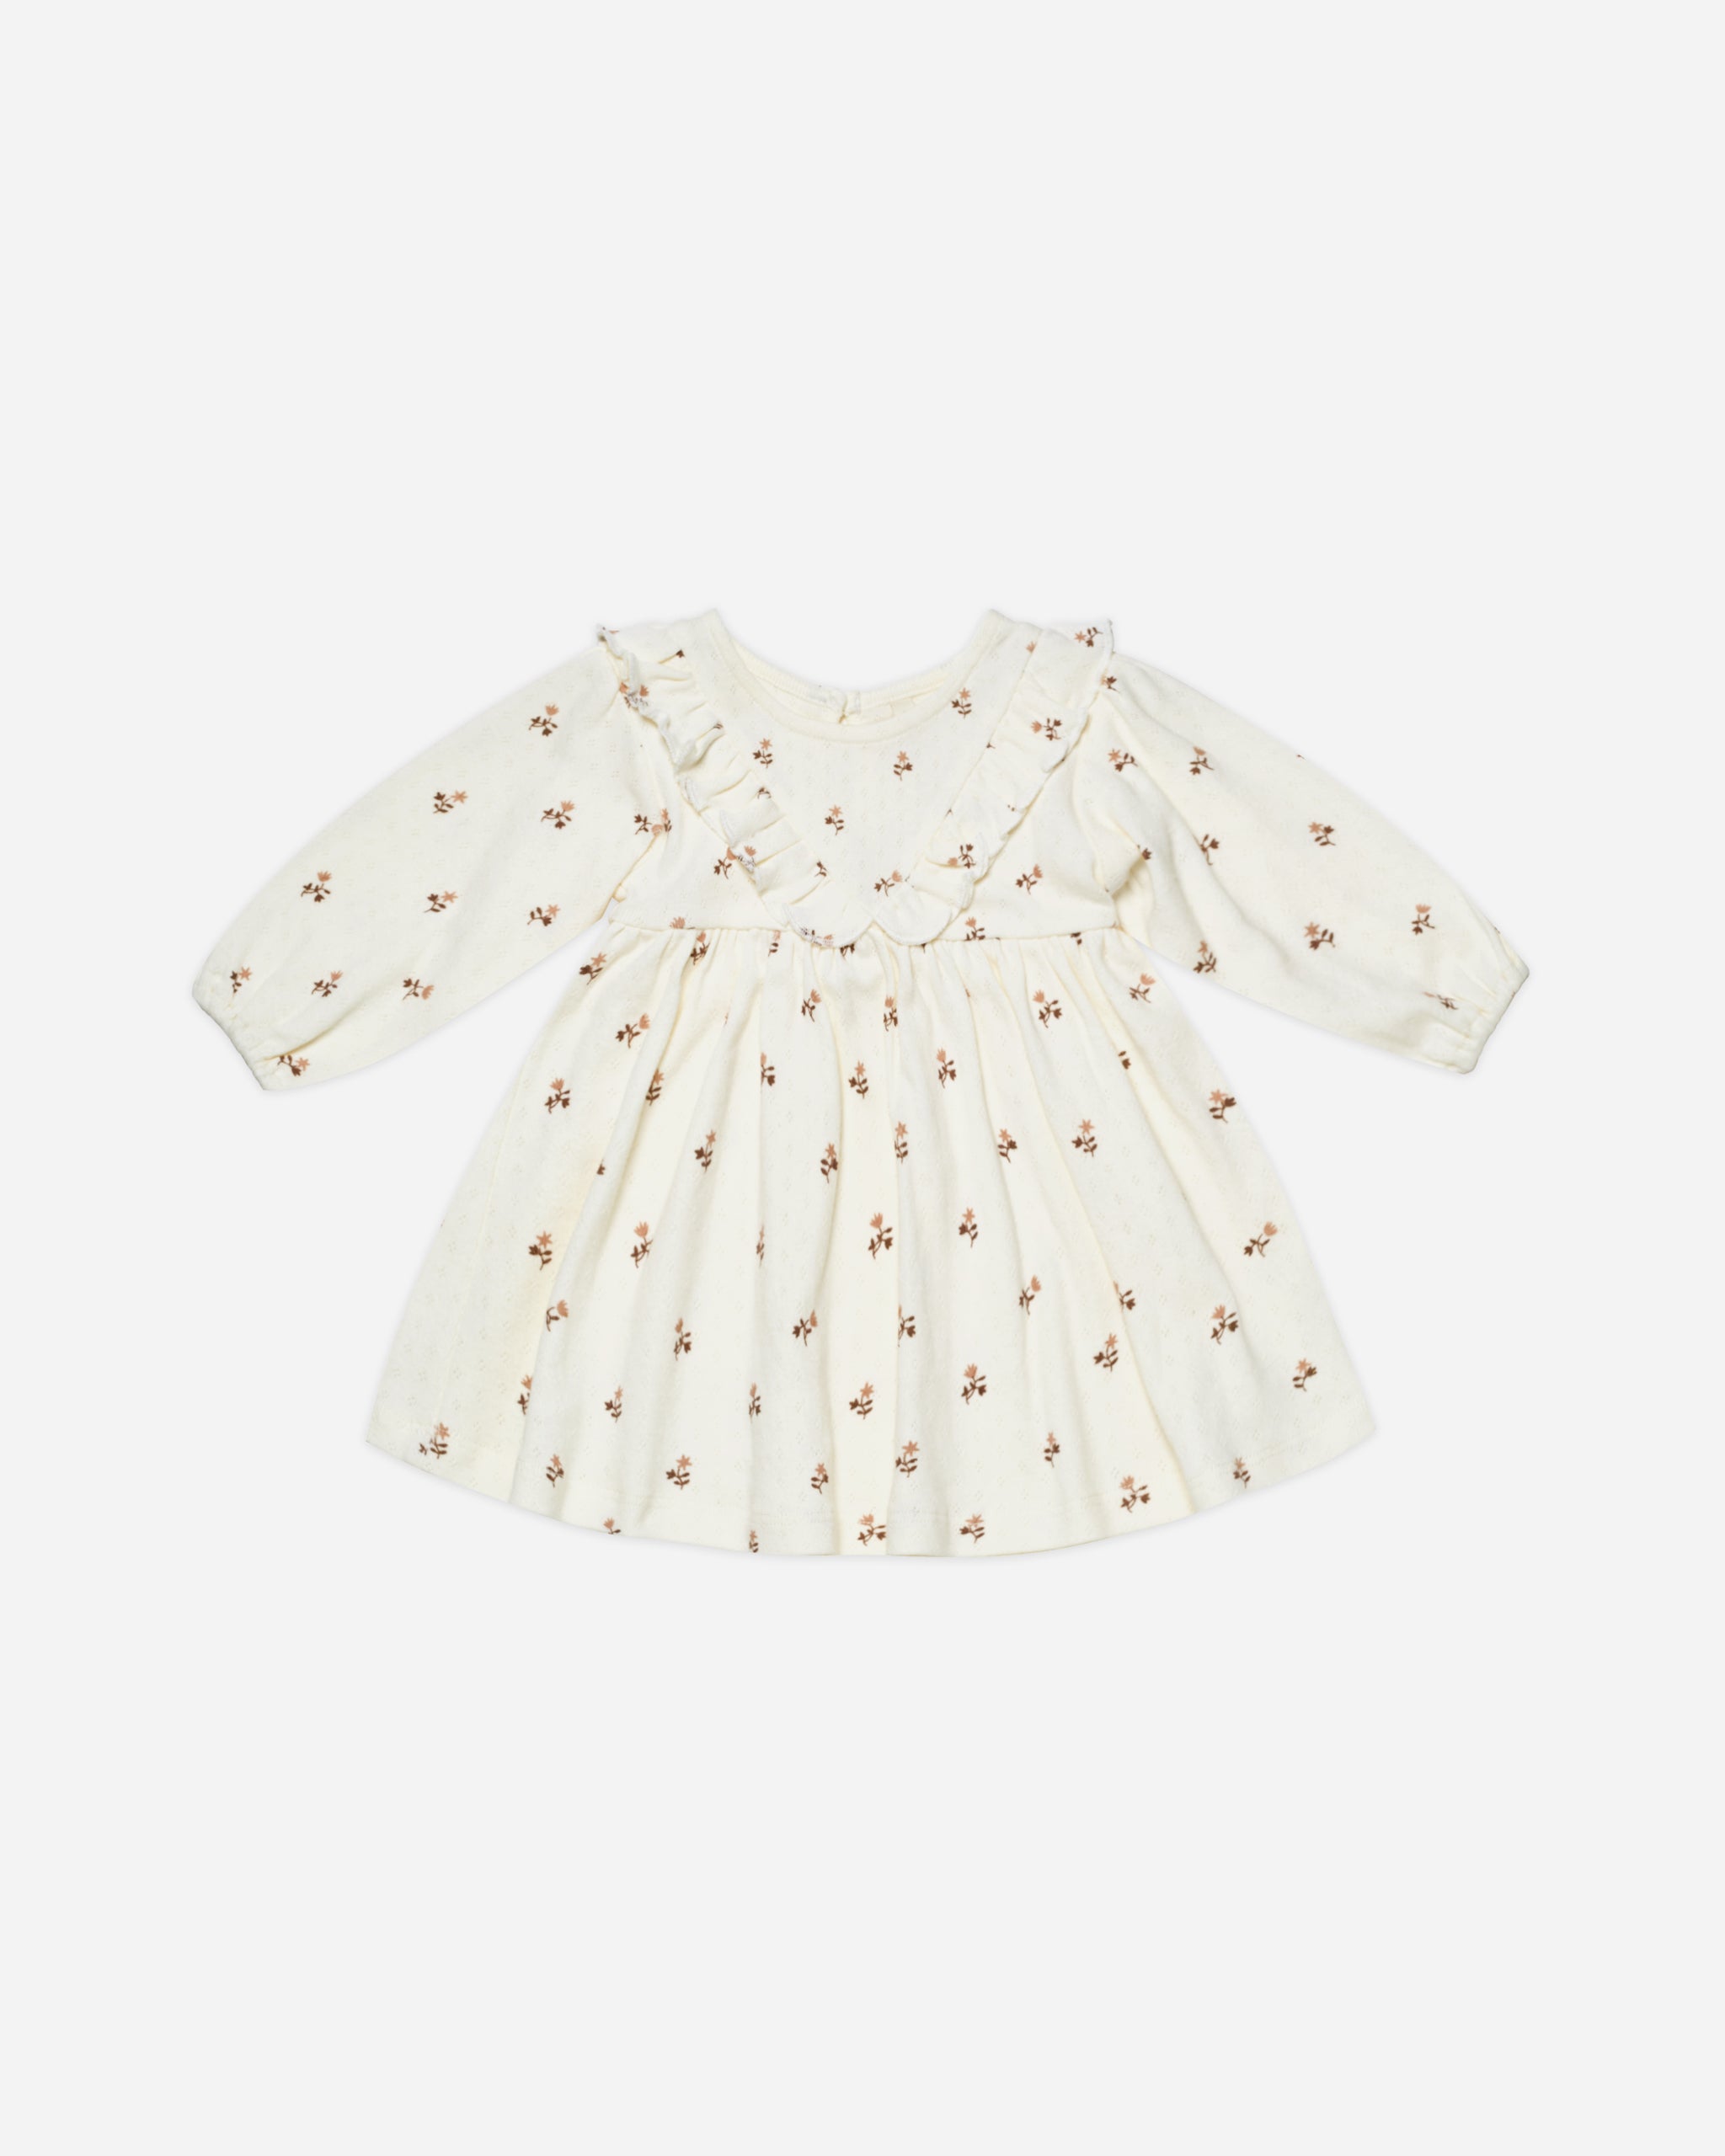 Long Sleeve Ruffle V Dress || Rose Fleur - Rylee + Cru | Kids Clothes | Trendy Baby Clothes | Modern Infant Outfits |